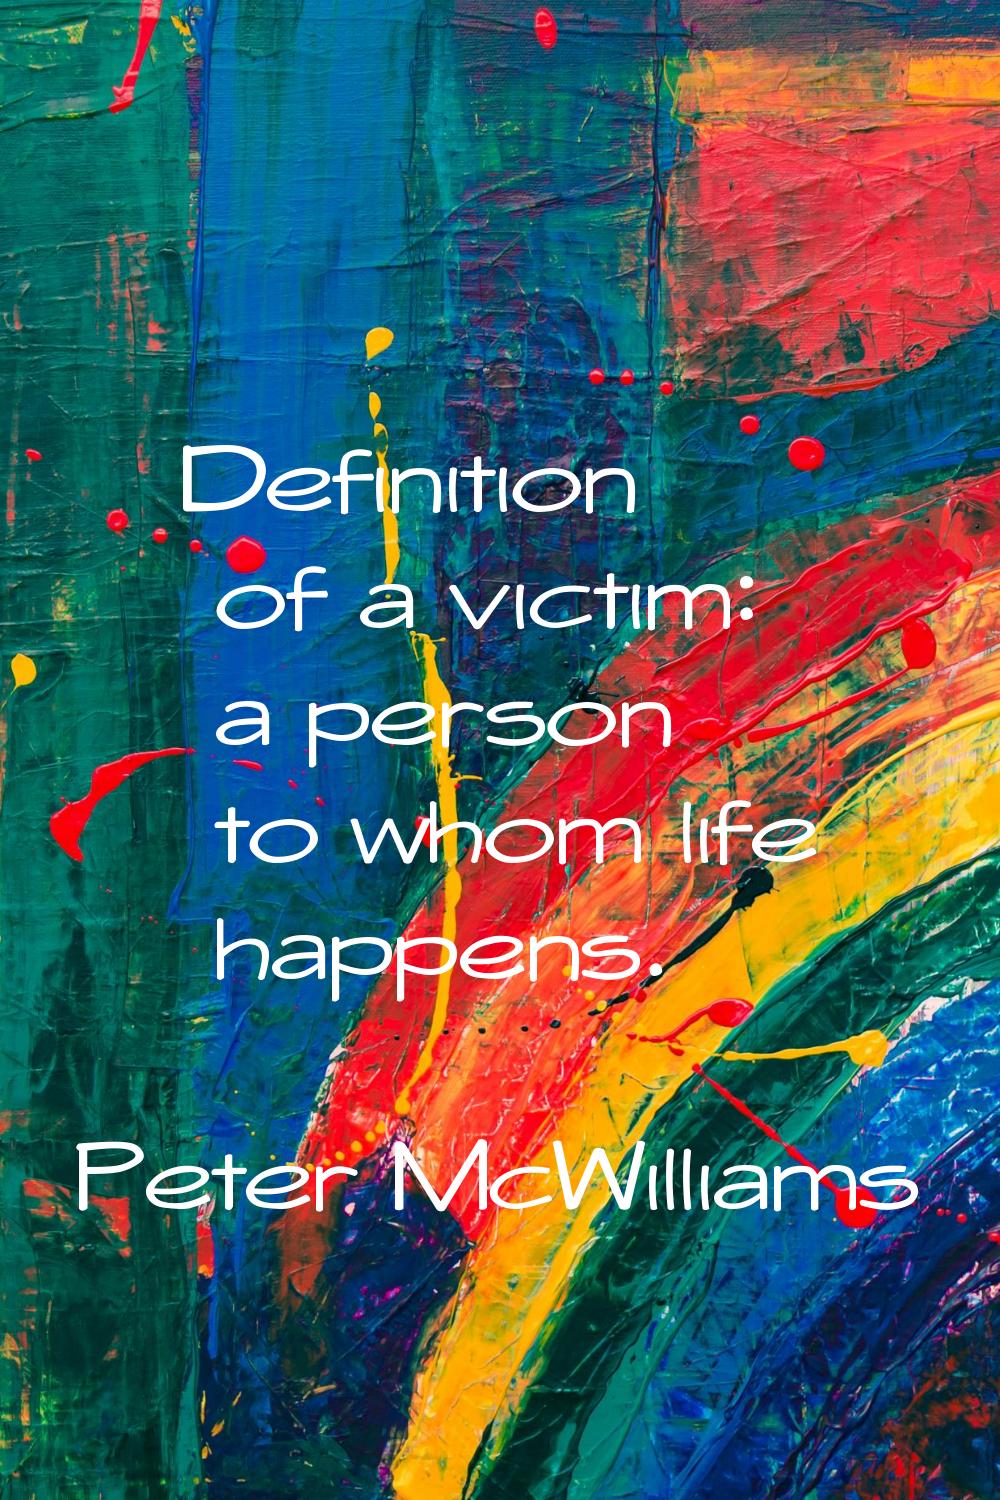 Definition of a victim: a person to whom life happens.